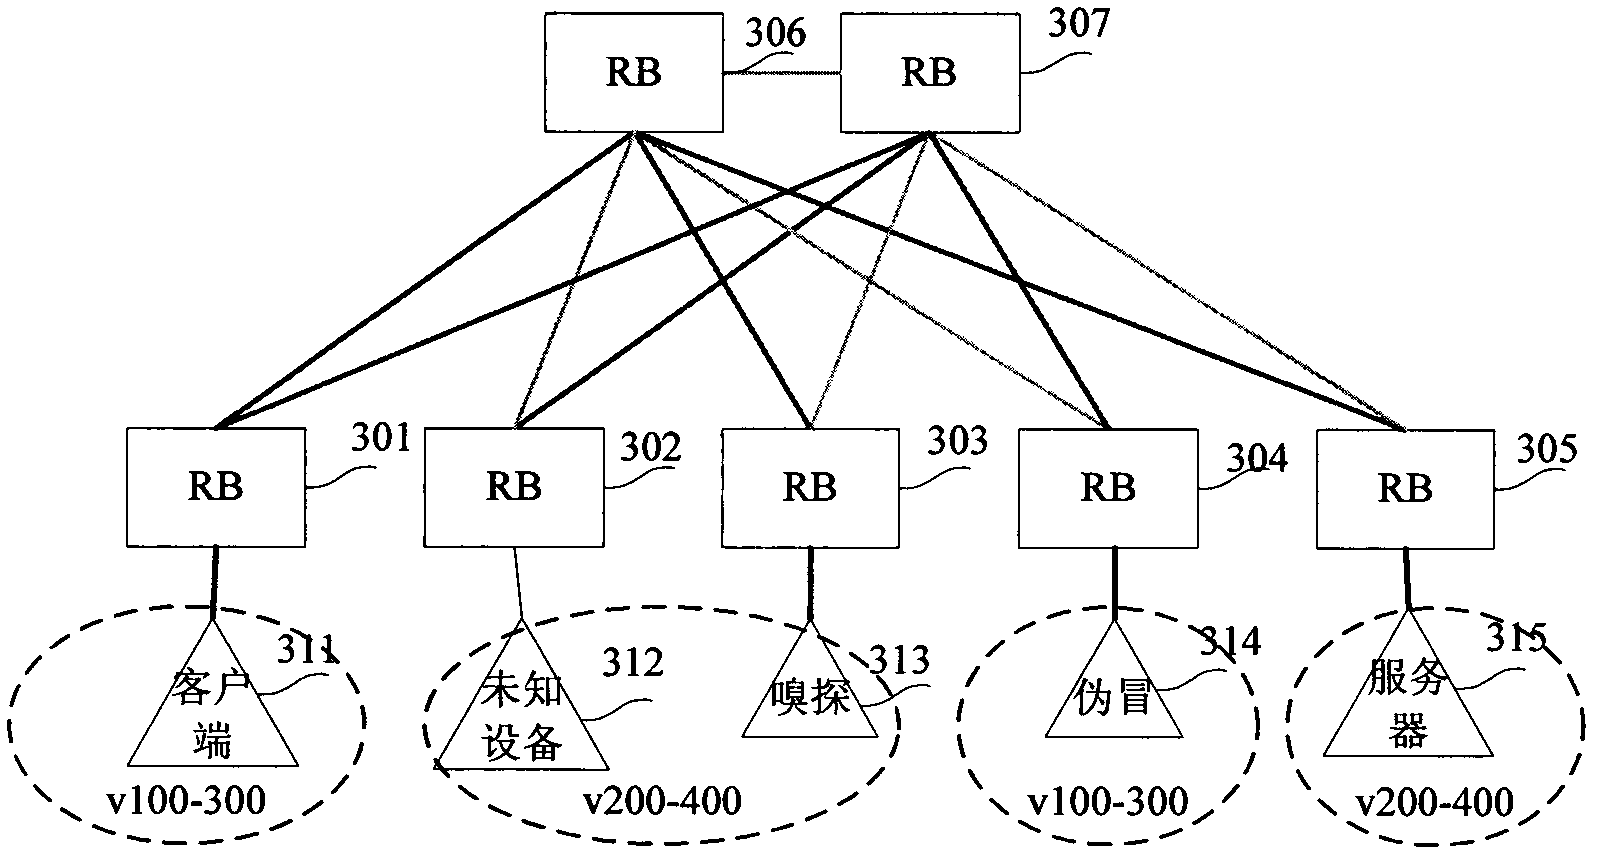 Dynamic host configuration protocol (DHCP) message forwarding method for transparent interconnection of lots of links (TRILL) network and routing bridge